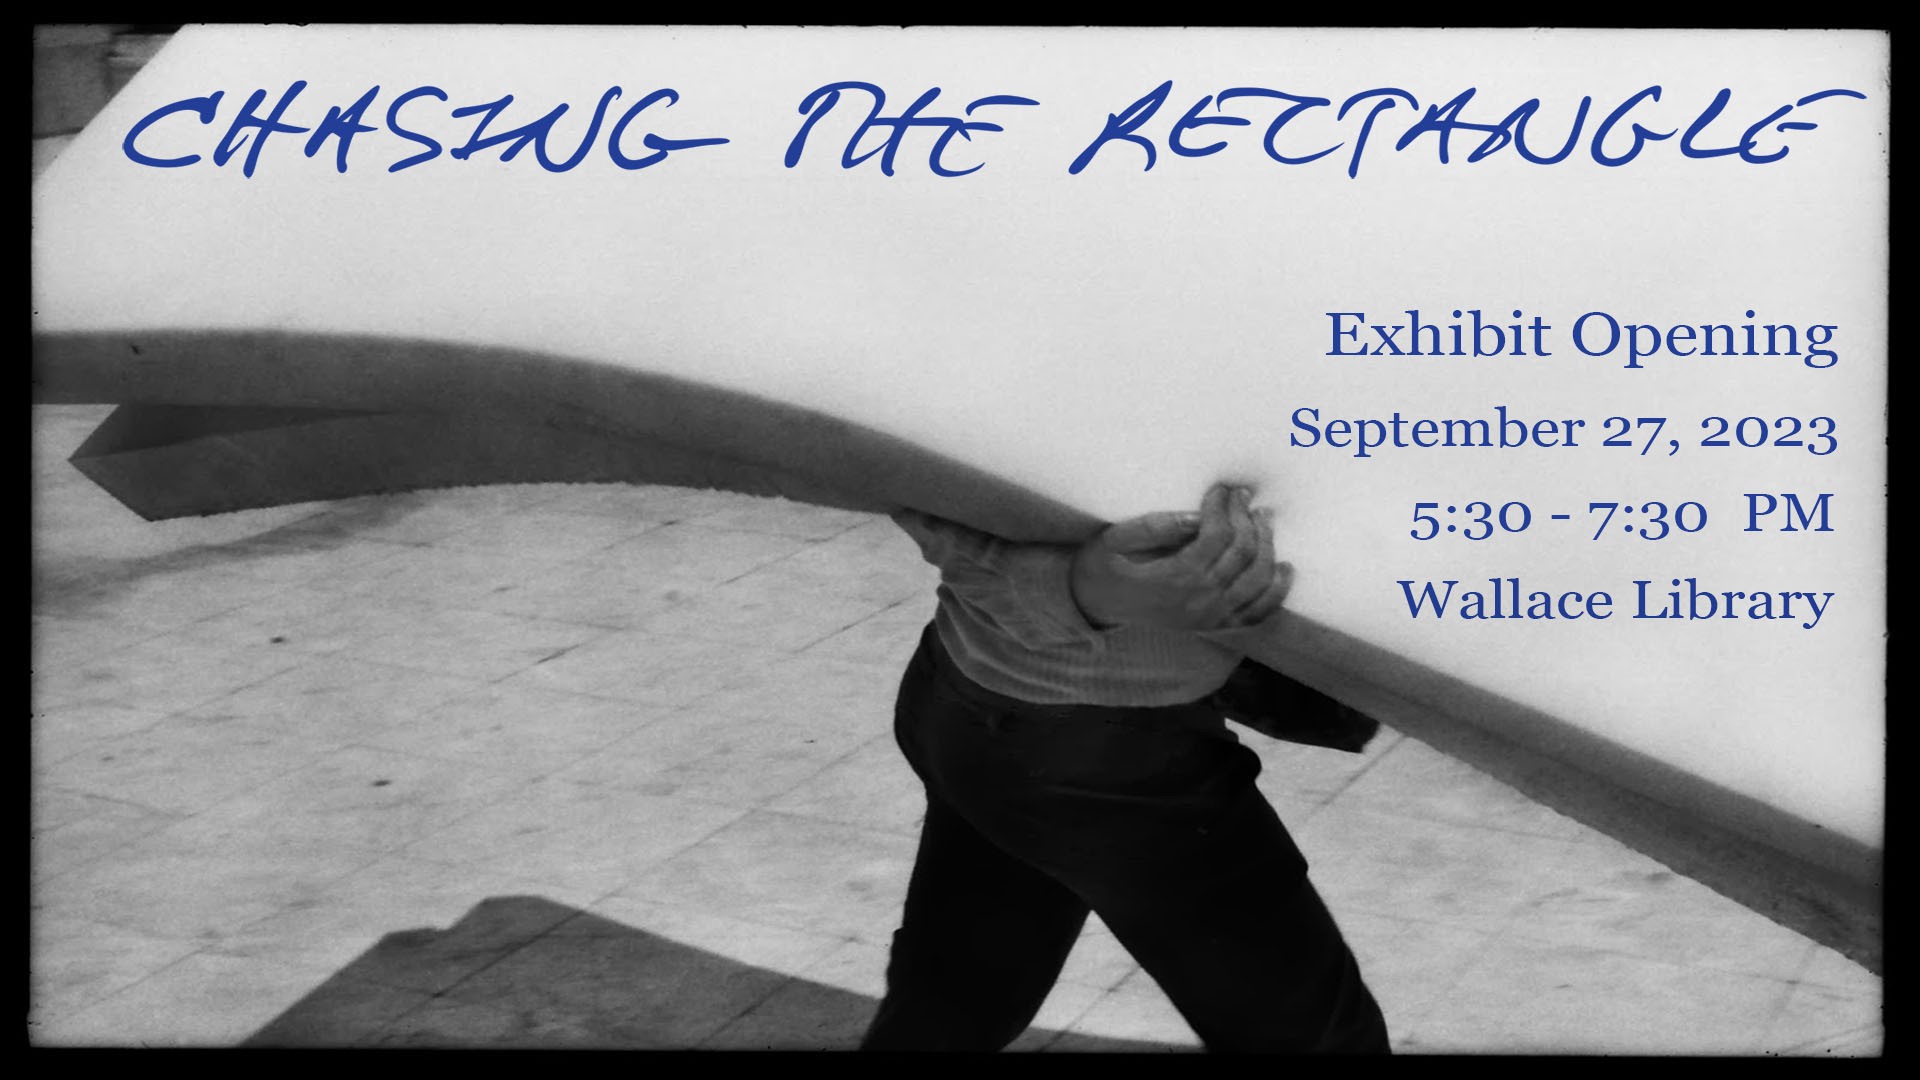 Image of a black and white photograph that shows someone holding a mattress. Across the top in blue is "Chasing the Rectangle," September 27, 2023, 5:30pm to 7:30pm, Wallace Library.